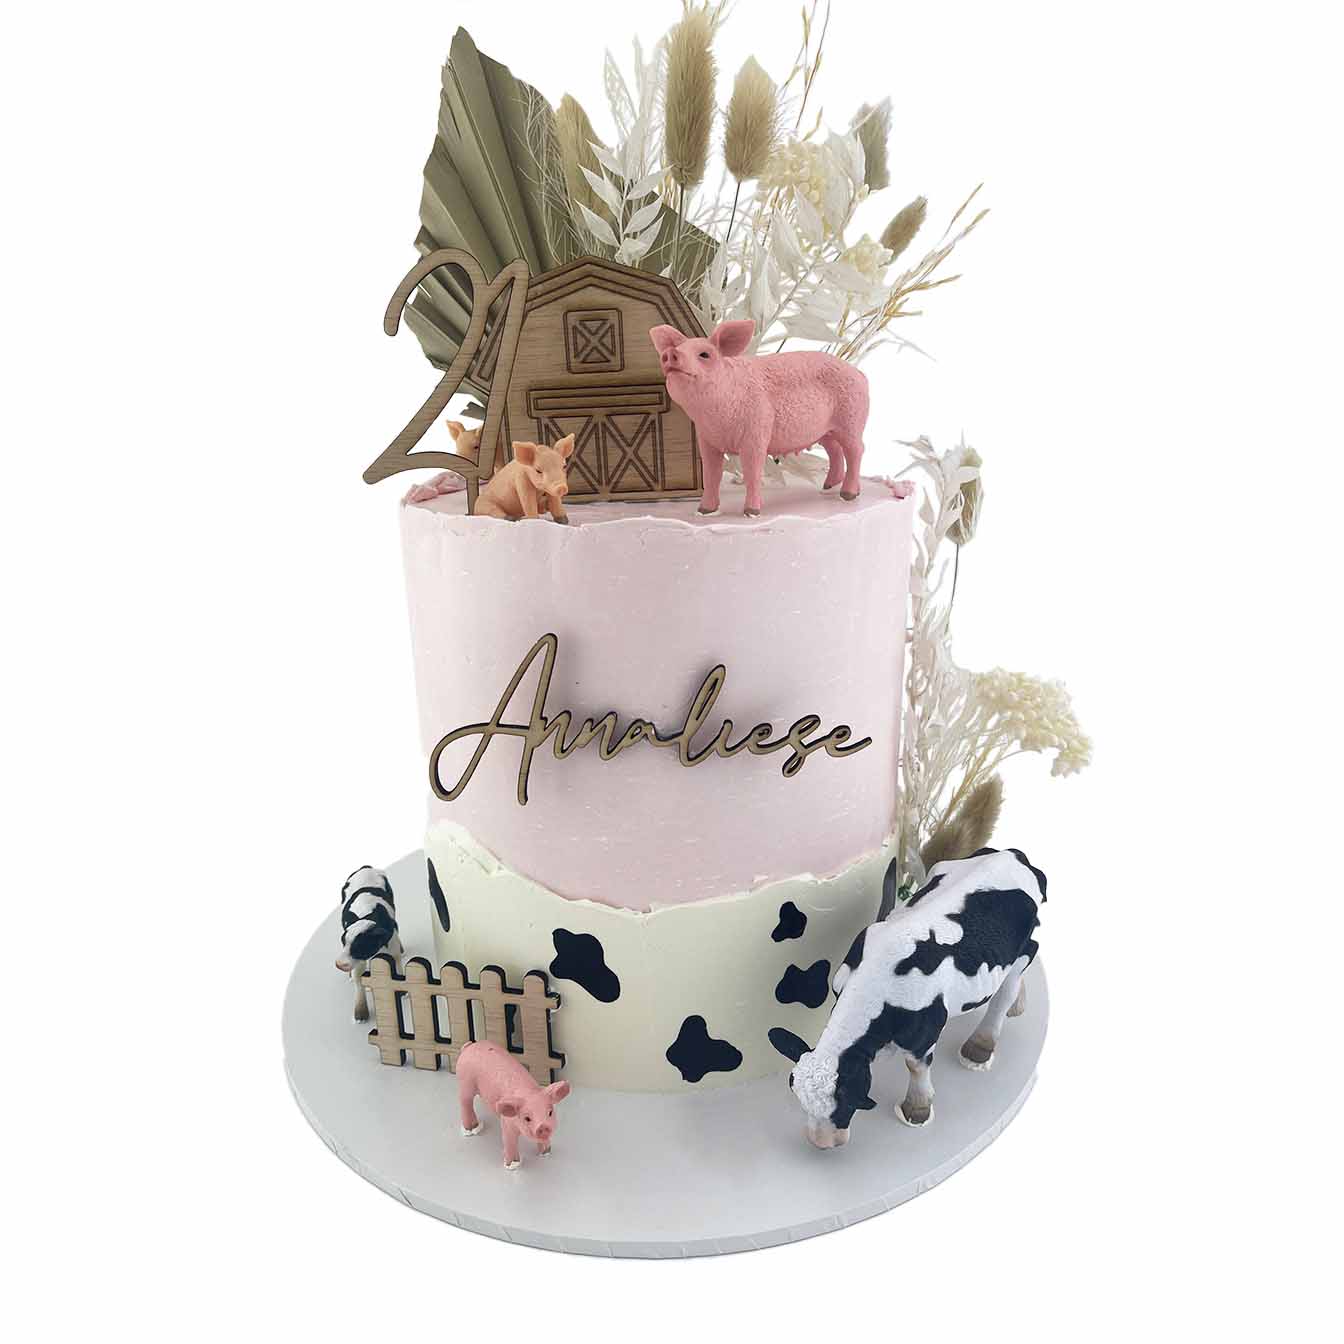 Pretty Barnyard Celebration Cake - A pink iced cake with hand-painted cow spots, wooden fence and barn toppers, pig and cow figurines, and dried flowers, a heartwarming centrepiece for a farm-themed celebration.